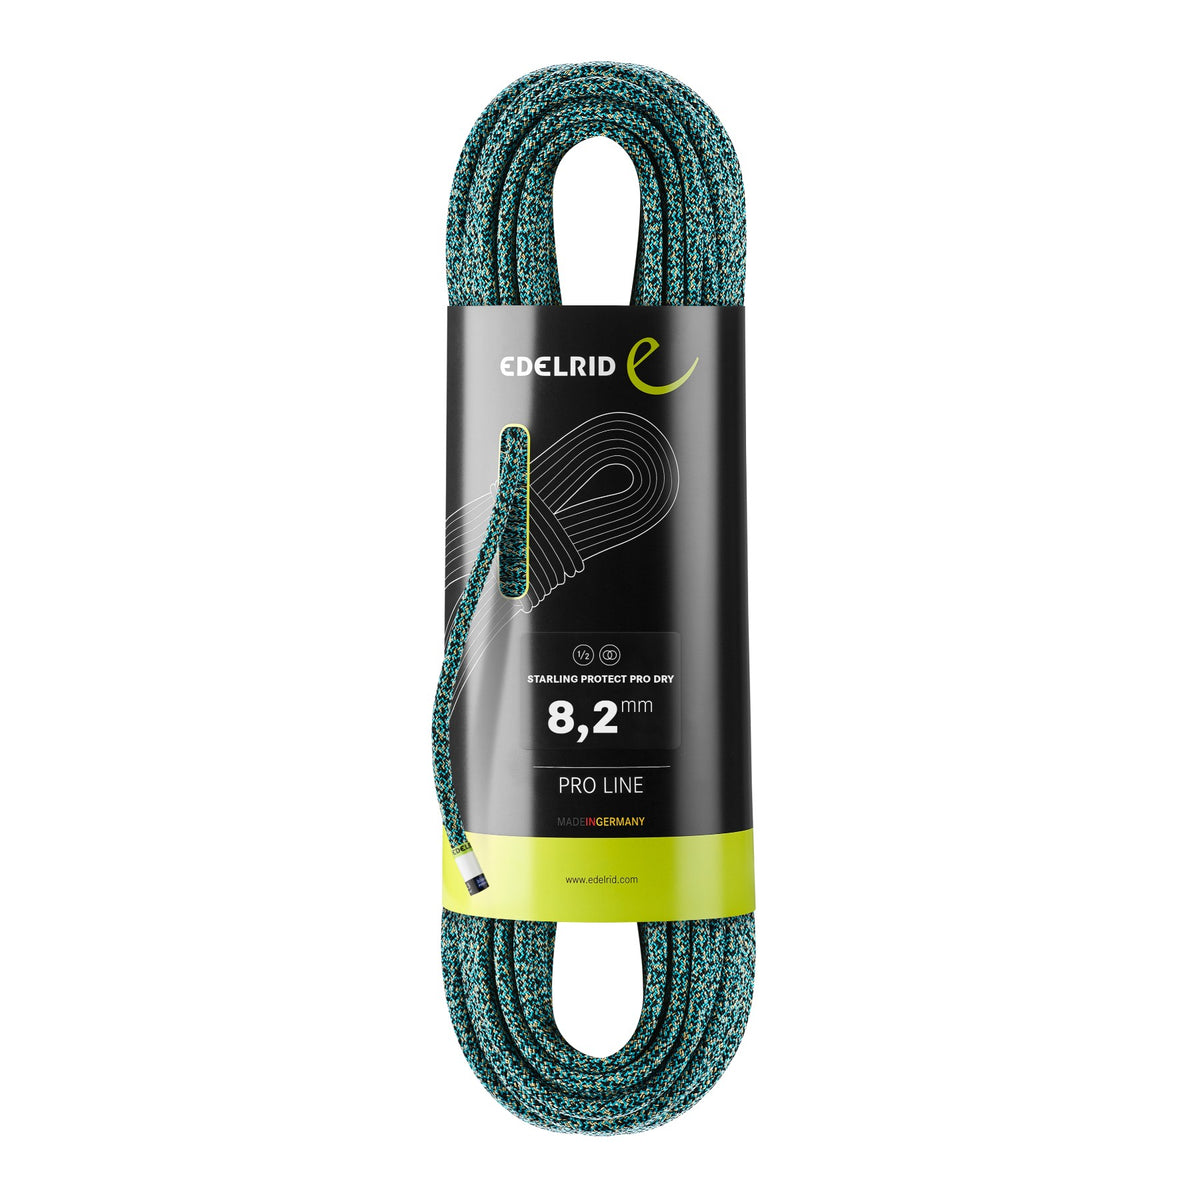 Edelrid Starling Protect Pro Dry 8.2mm x 50m, Colour Ice Mint-Night